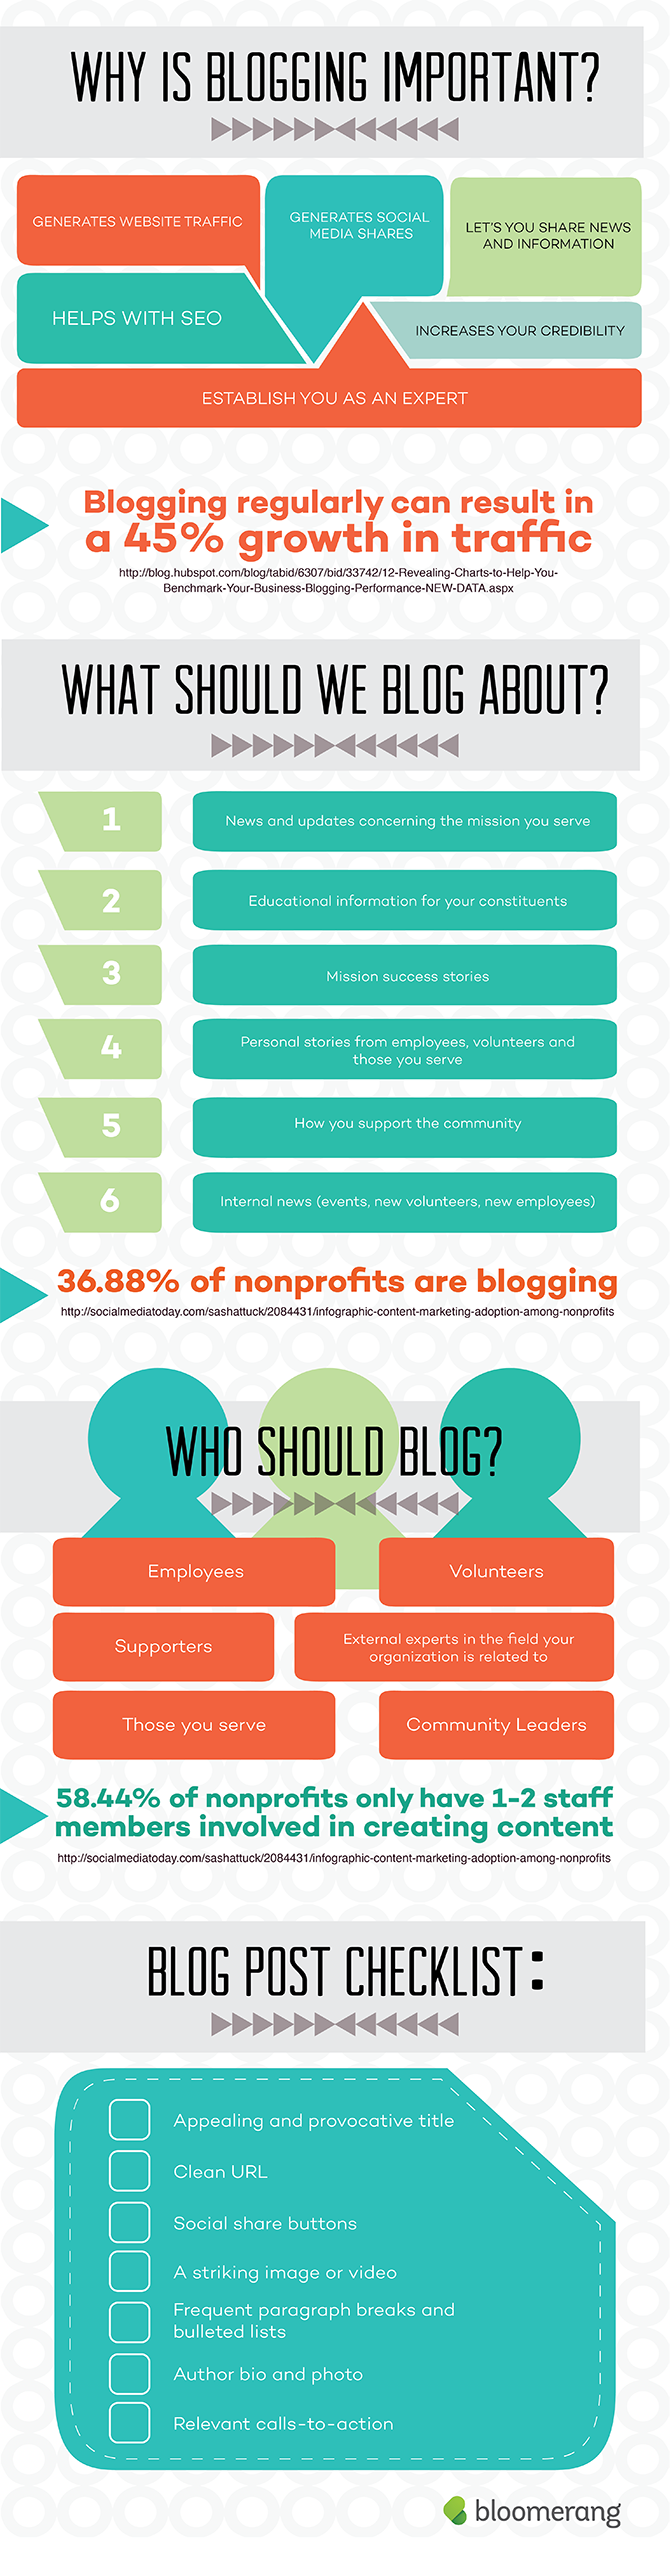 Why Is Blogging Important [INFOGRAPHIC]